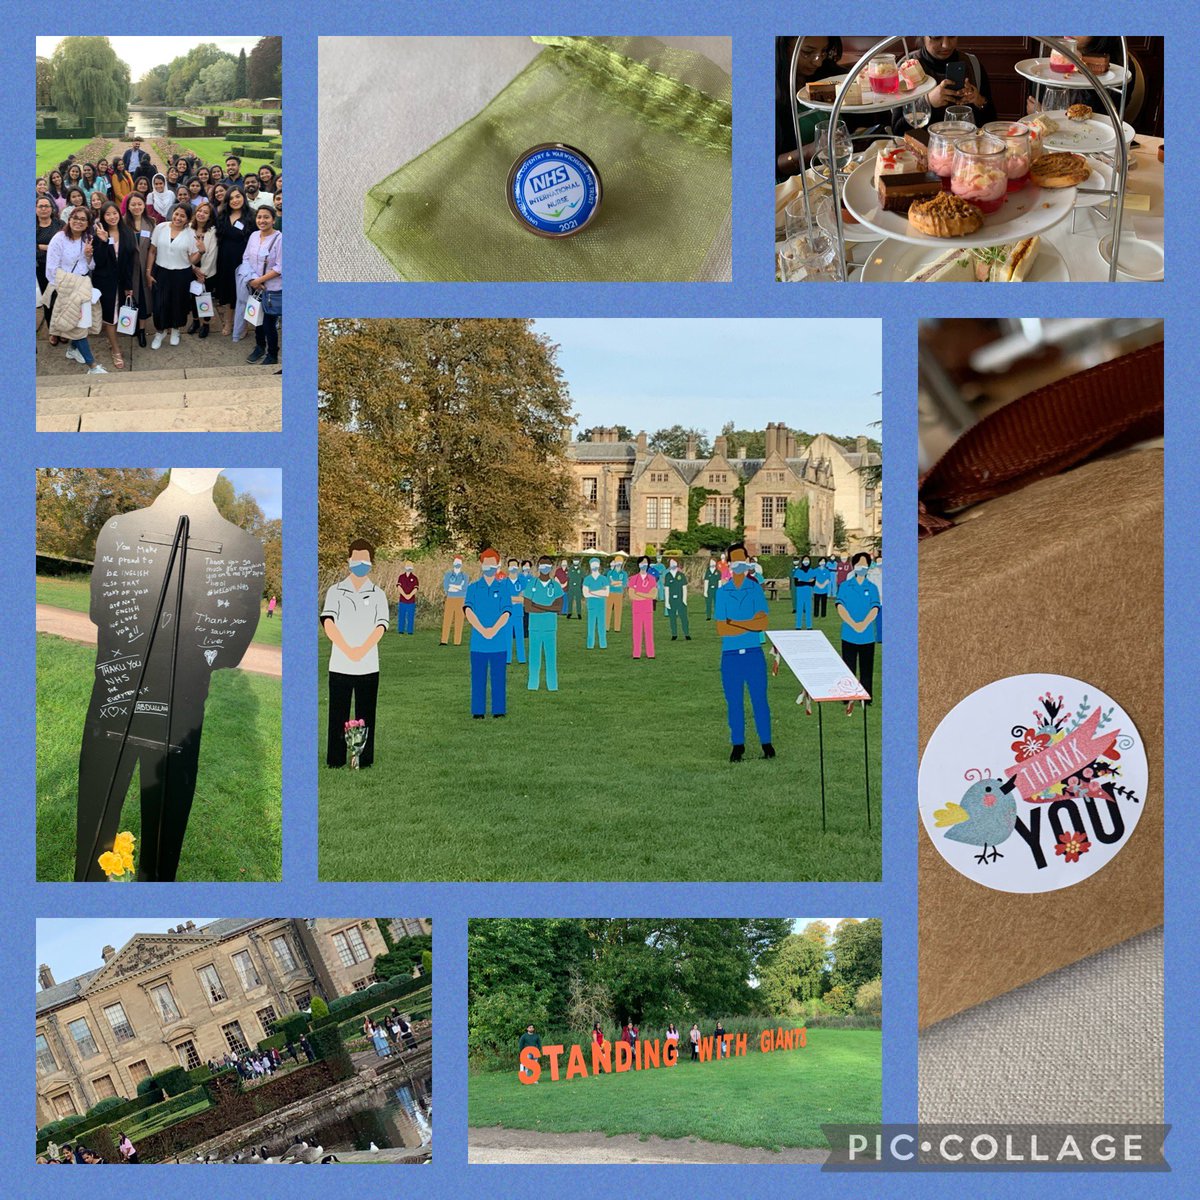 A wonderful afternoon celebrating the contribution of our international nurses 🌍@nhsuhcw what a lovely and poignant end  #Standingwithgiants  display @CoombeAbbey @NHSCharities @ninamorganUHCW @elainepclarke @IntlNurses_UHCW